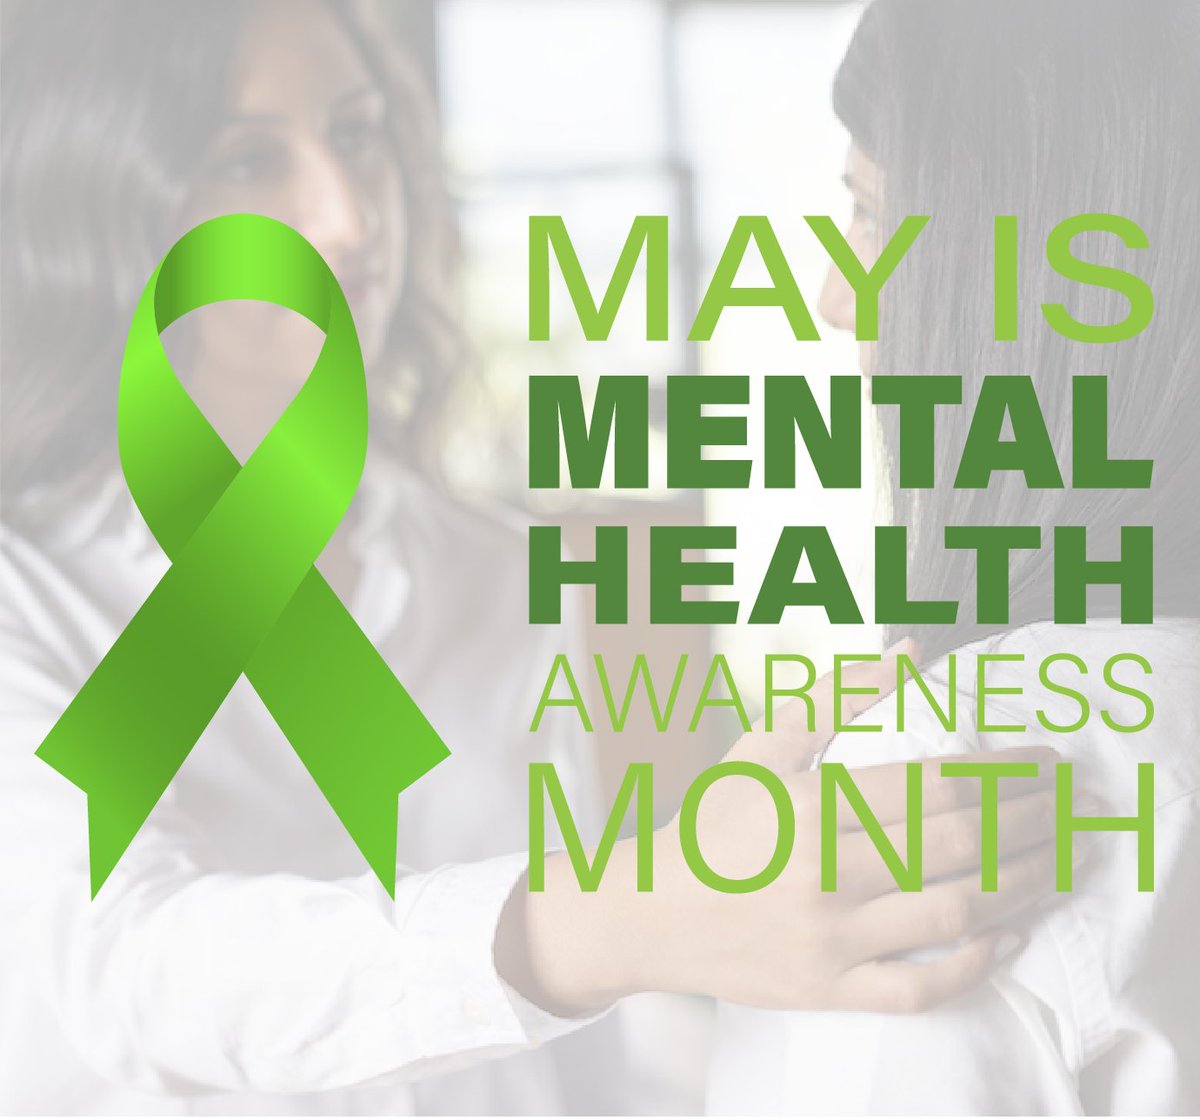 May is Mental Health Awareness Month. Let's raise awareness, break stigma, & prioritize self-care. Remind ourselves & others it's okay not to be okay. Let's support each other, seek help when needed. You are not alone. 💚 #MentalHealthMonth #BreakTheStigma #YouAreNotAlone'